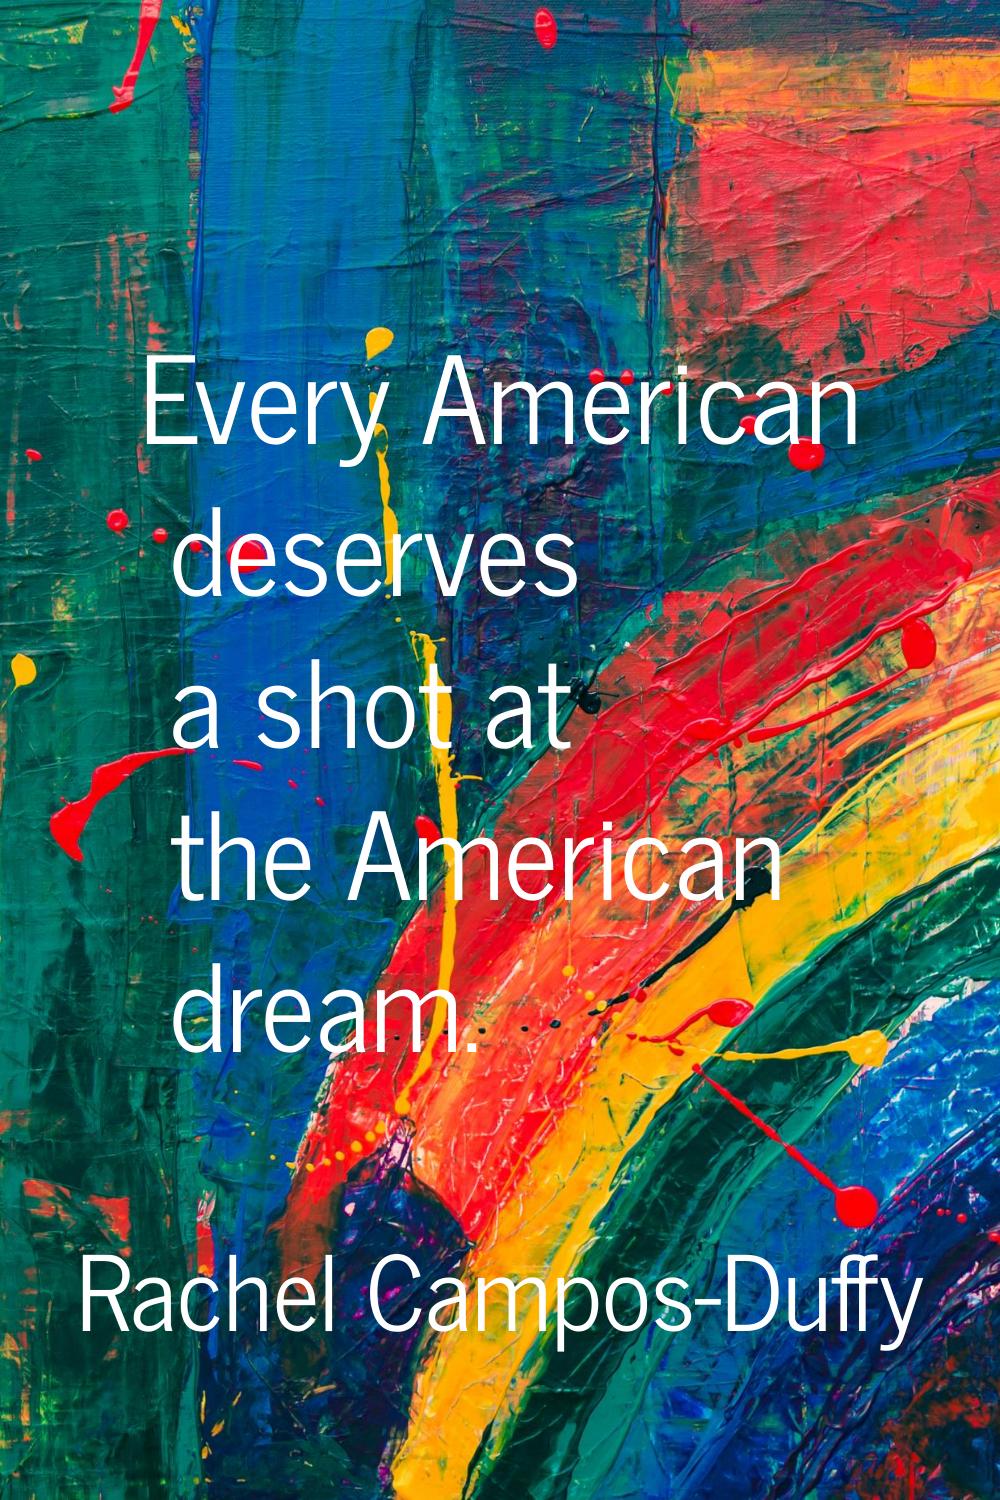 Every American deserves a shot at the American dream.